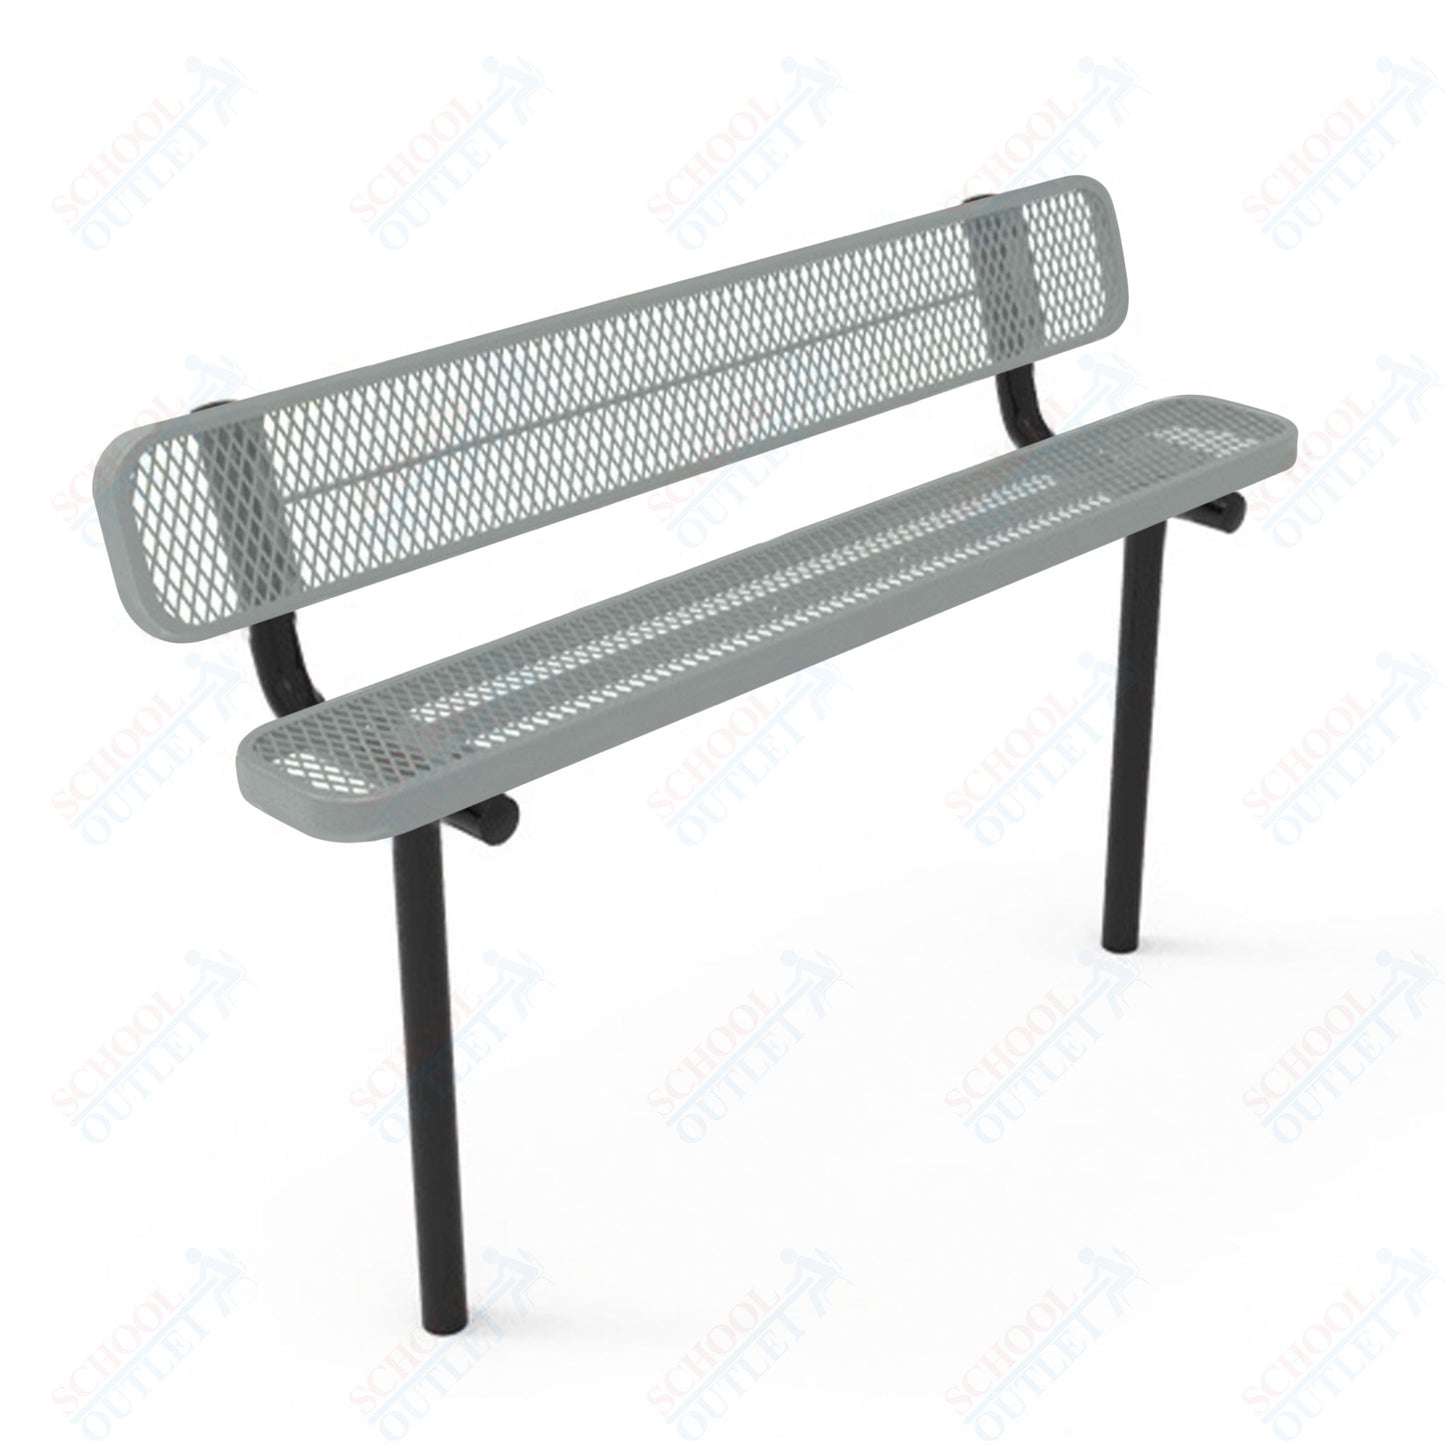 MyTcoat - Standard Outdoor Bench with Back - Inground Mount 4' L (MYT-BRT04-19)